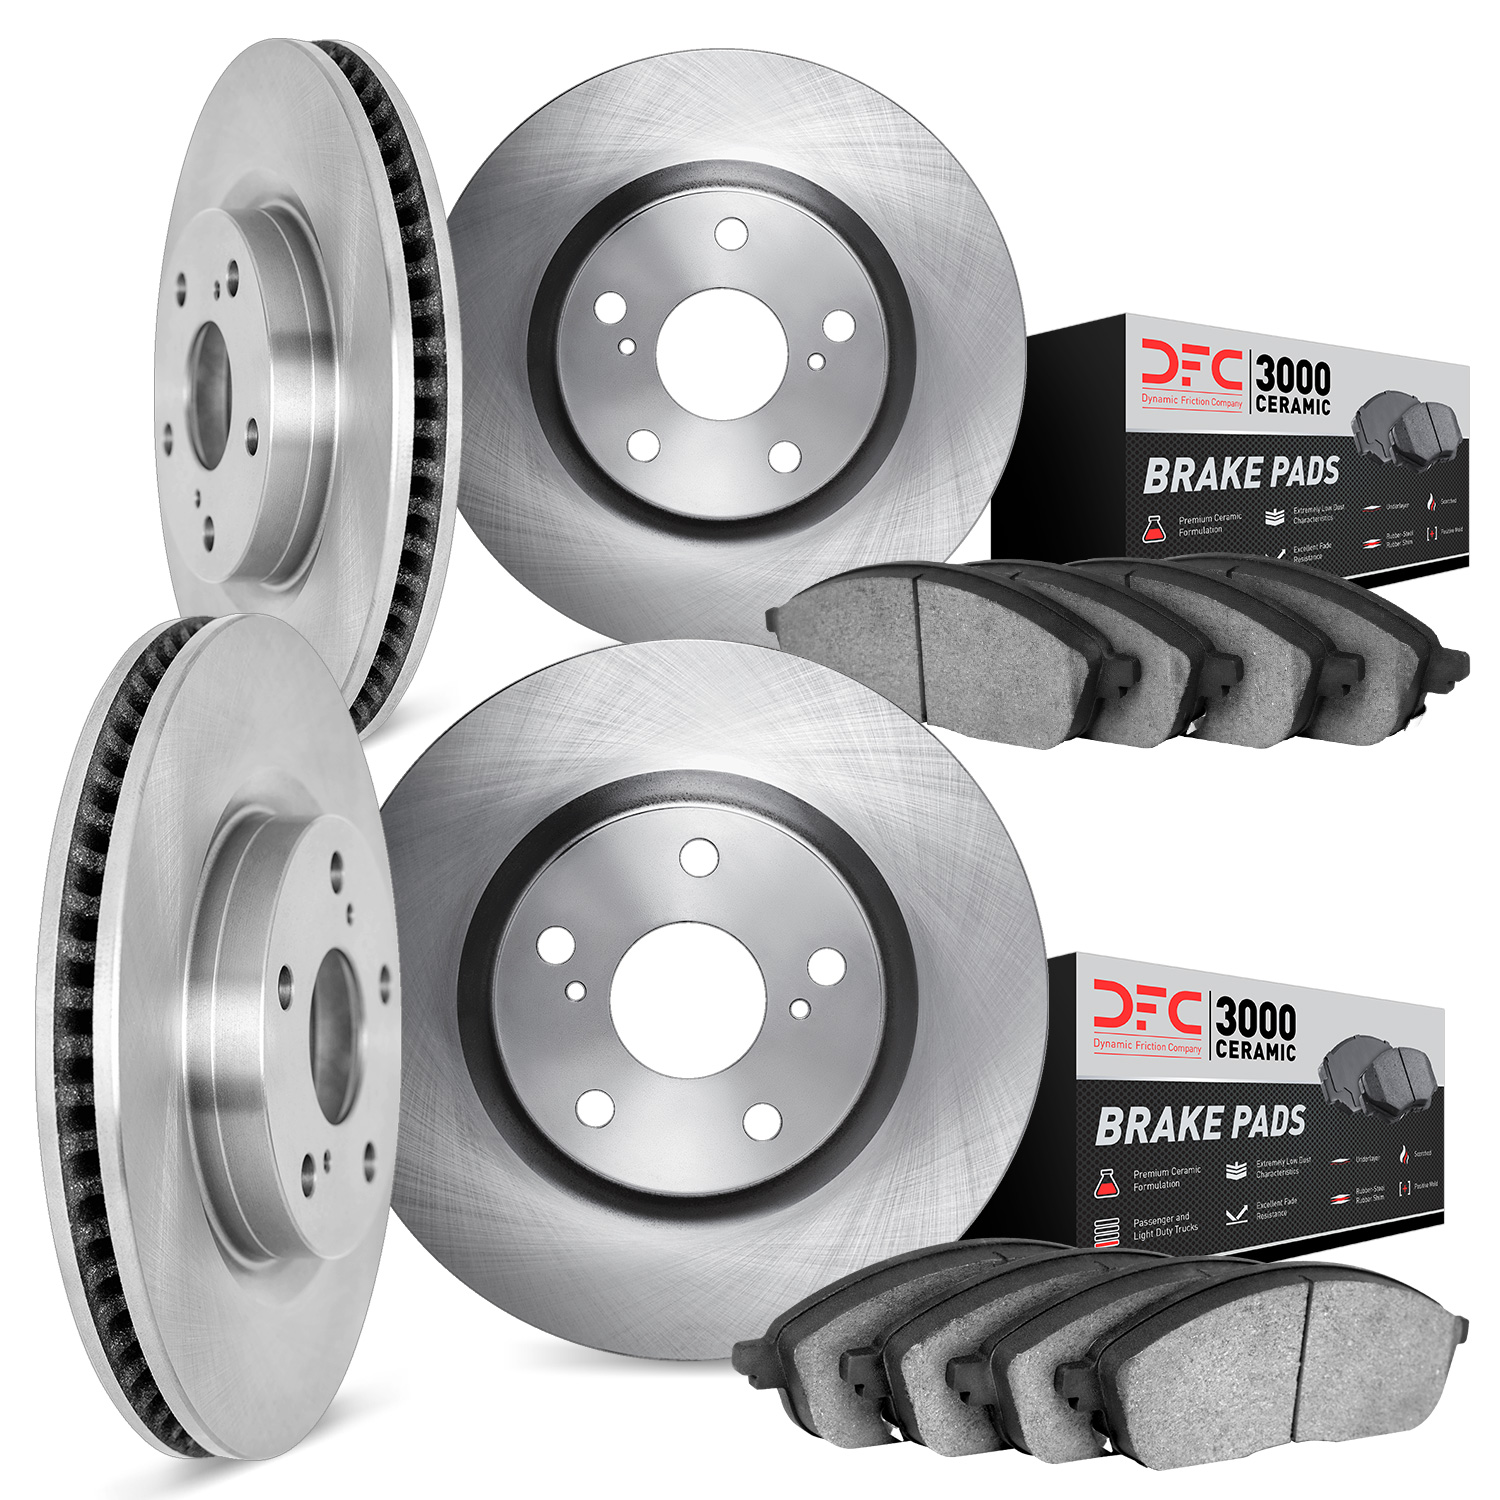 6304-68010 Brake Rotors with 3000-Series Ceramic Brake Pads Kit, Fits Select Infiniti/Nissan, Position: Front and Rear